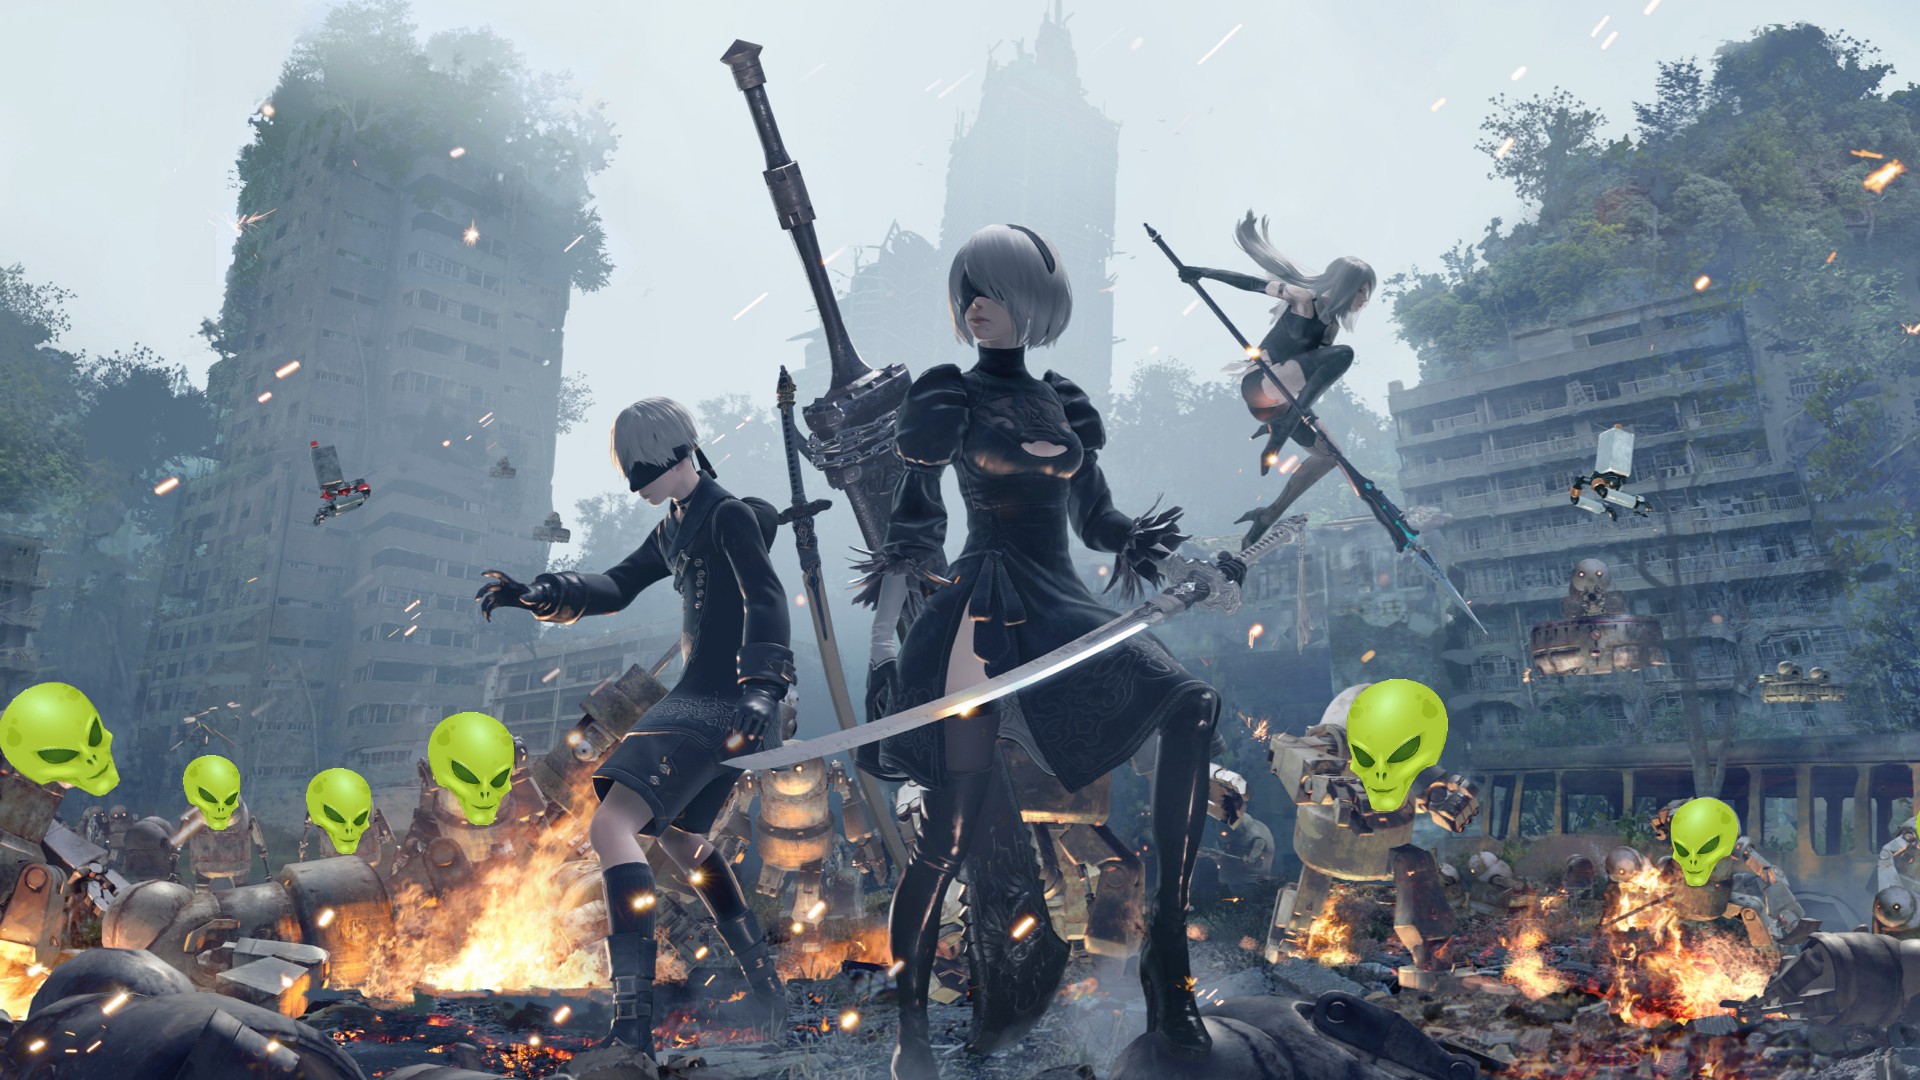 Nier Automata creator says he wants aliens to destroy the Earth